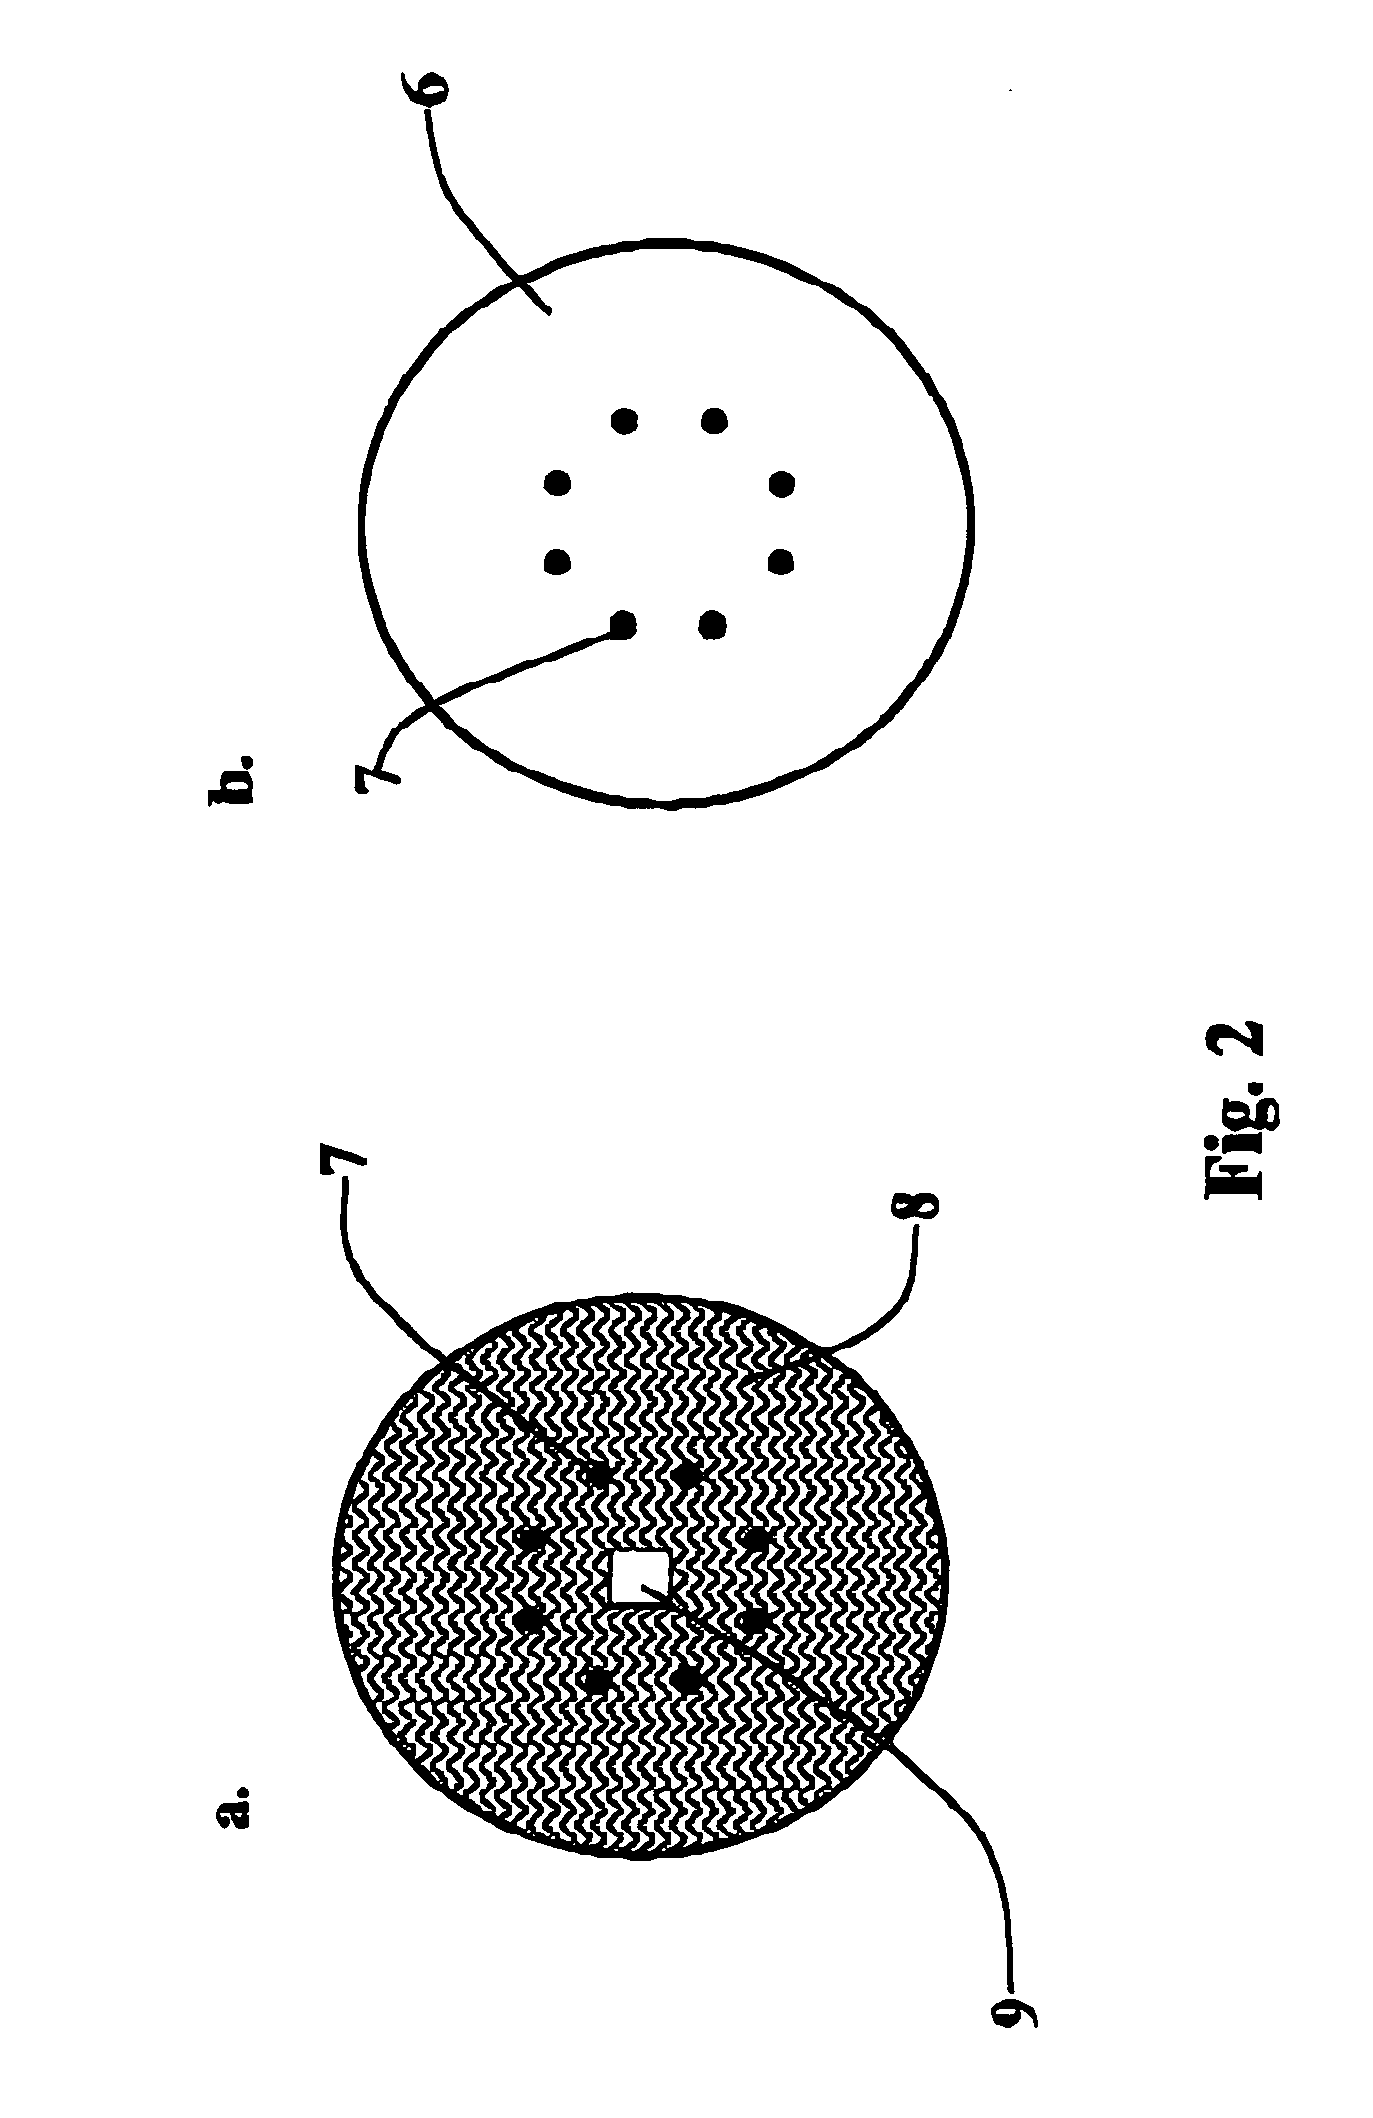 System, method and apparatus for multi-beam lithography including a dispenser cathode for homogeneous electron emission